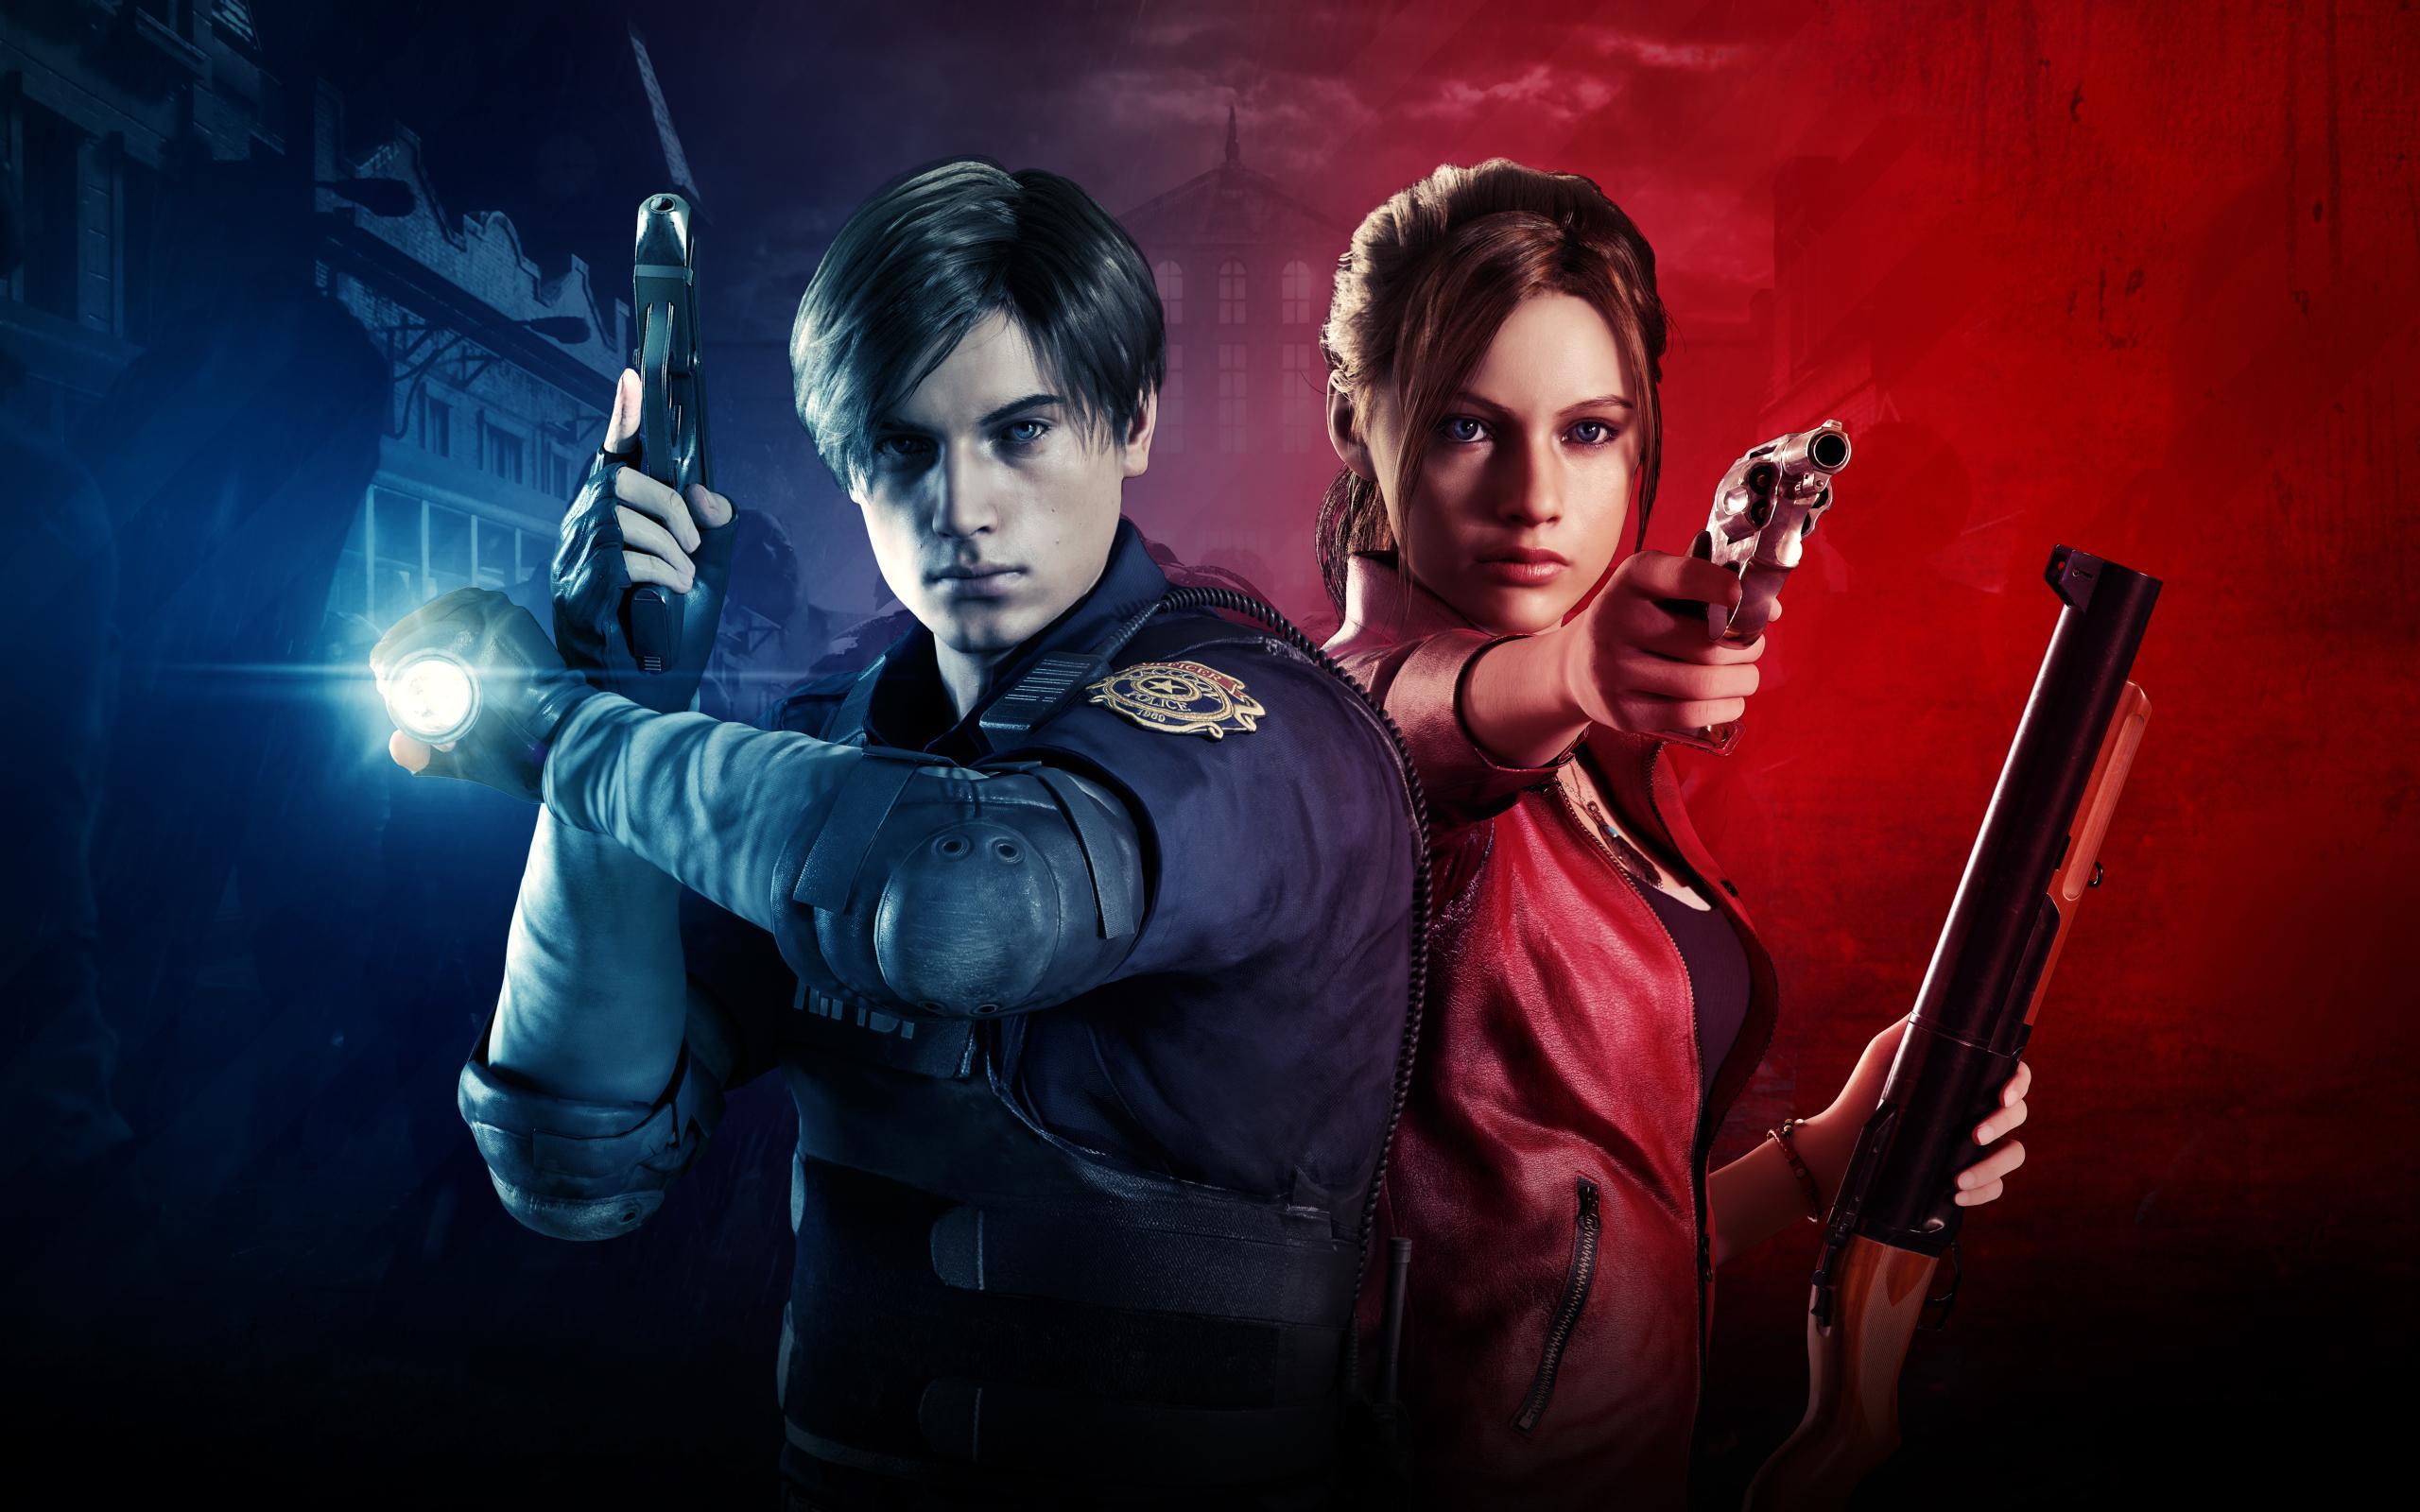 Leon S Kennedy Wallpapers Top Free Leon S Kennedy Backgrounds Wallpaperaccess 5275